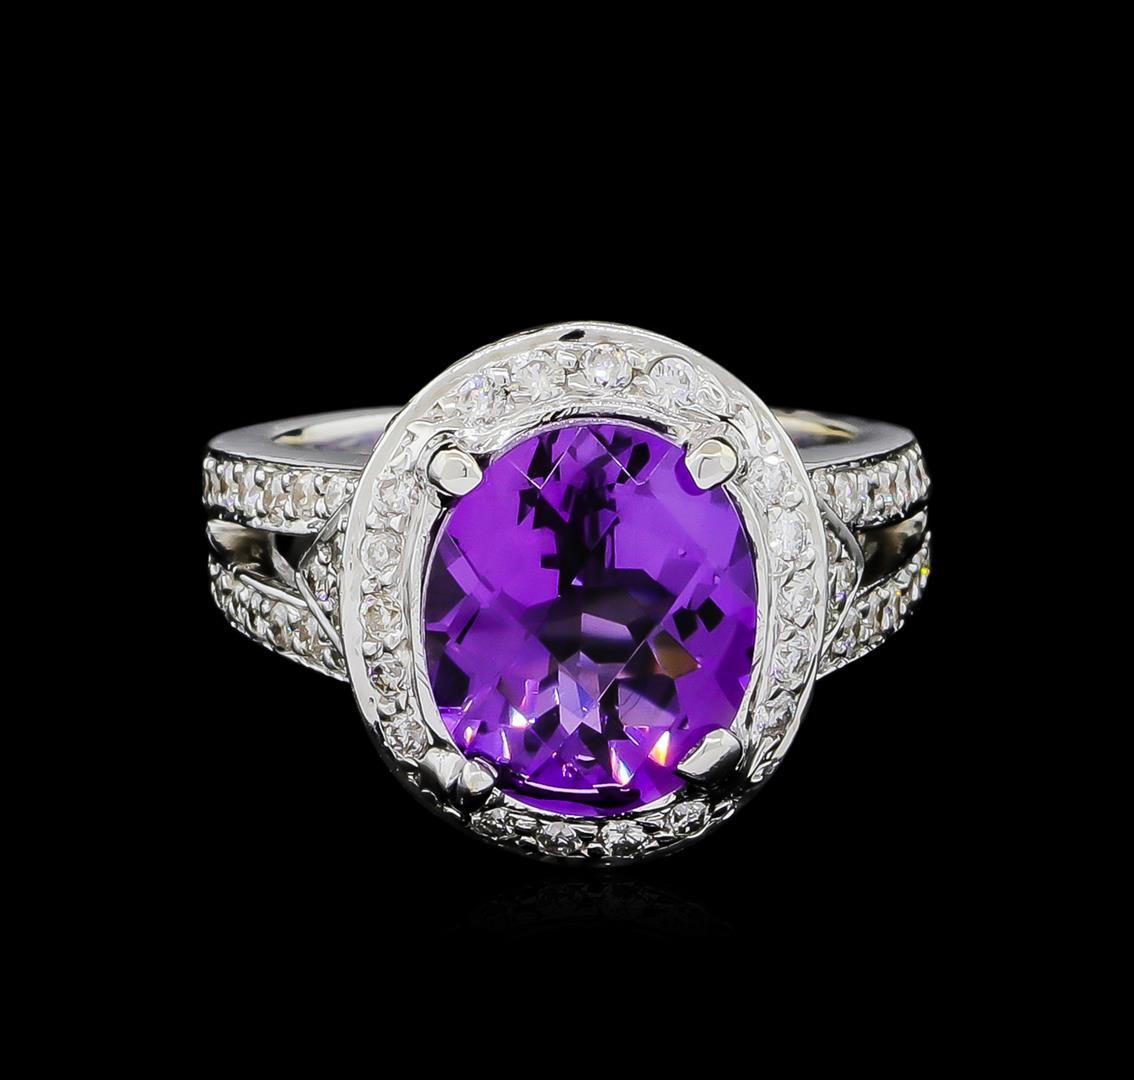 4.77 ctw Amethyst and Diamond Ring - 14KT White Gold